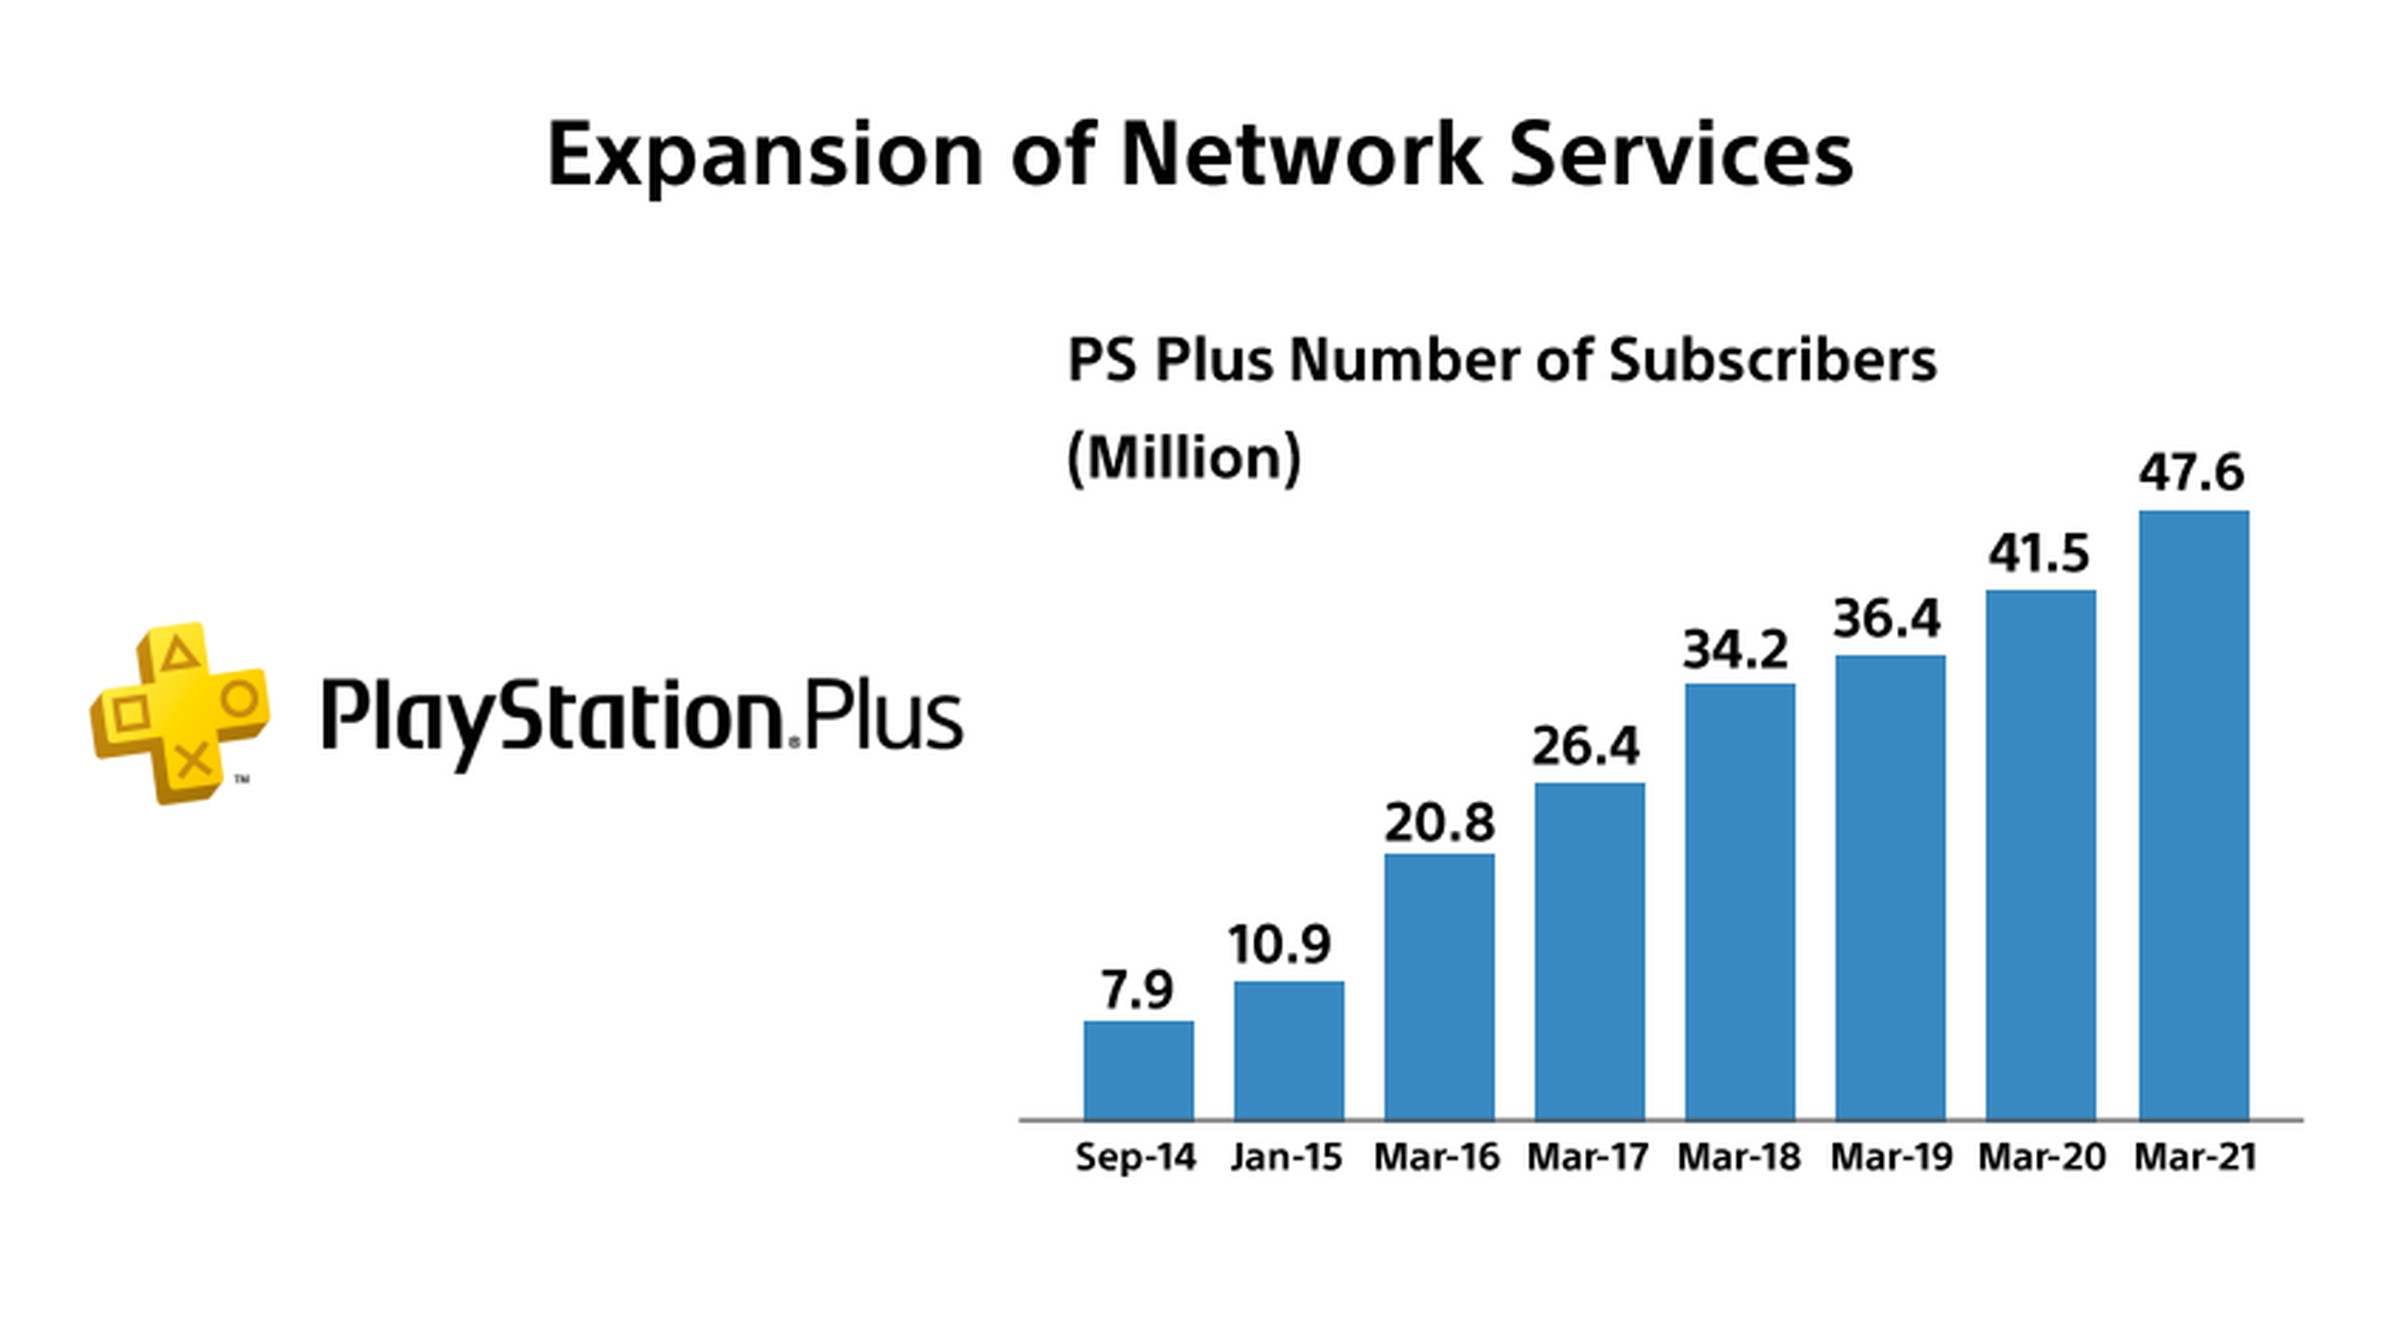 Sony’s PS Plus network has seen steady but not explosive growth.